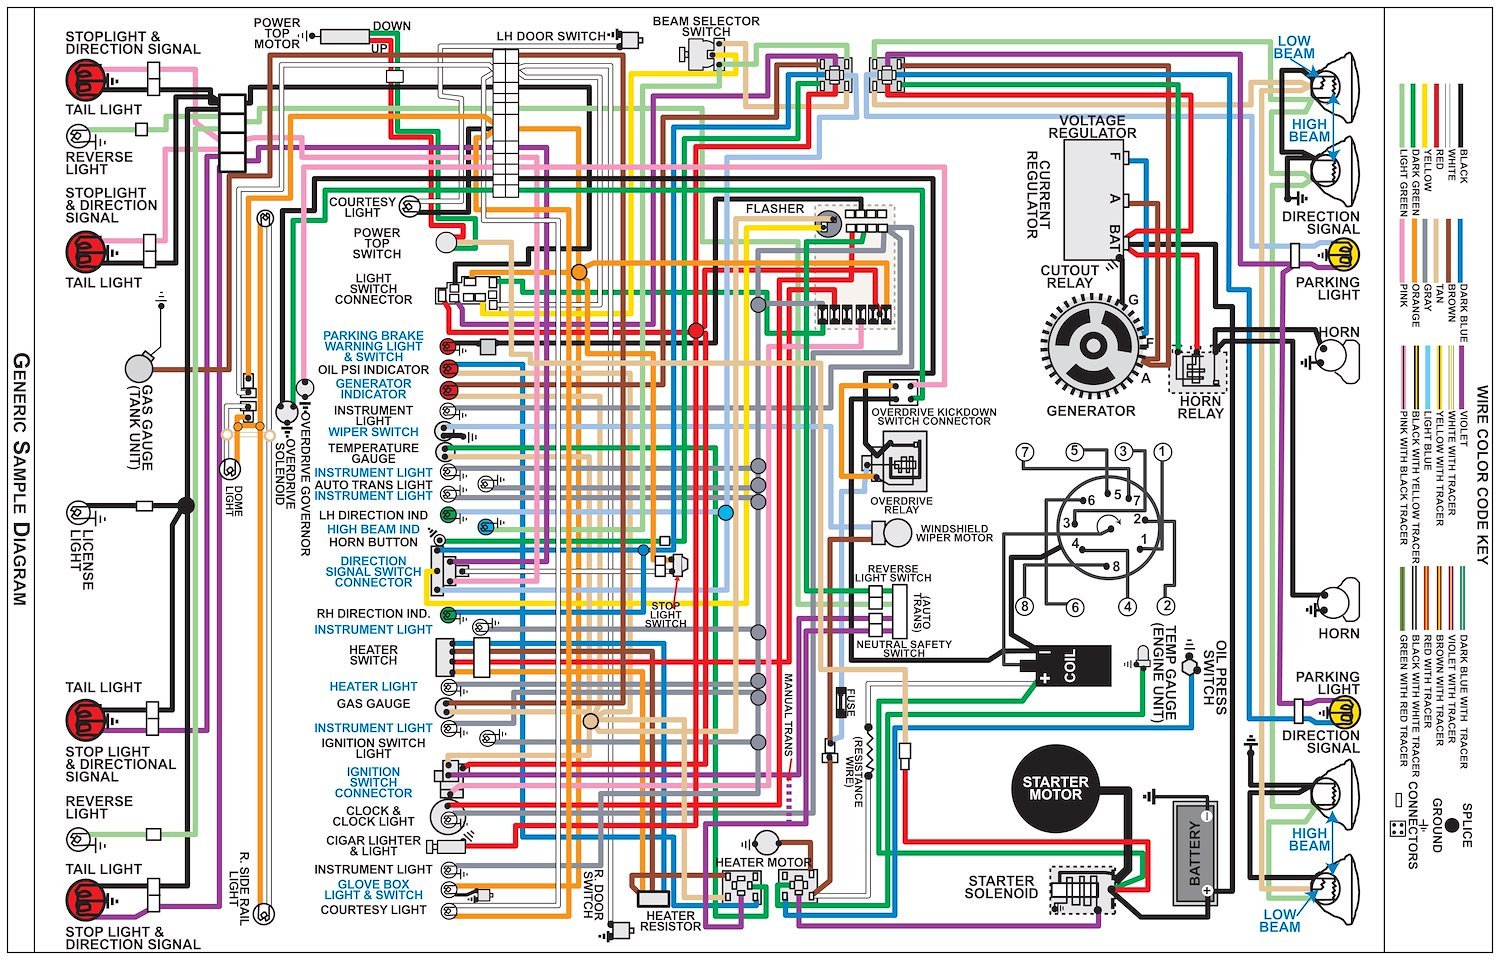 Wiring Diagram for 1961-1963 Ford F-Series Truck, 11 in x 17 in., Laminated